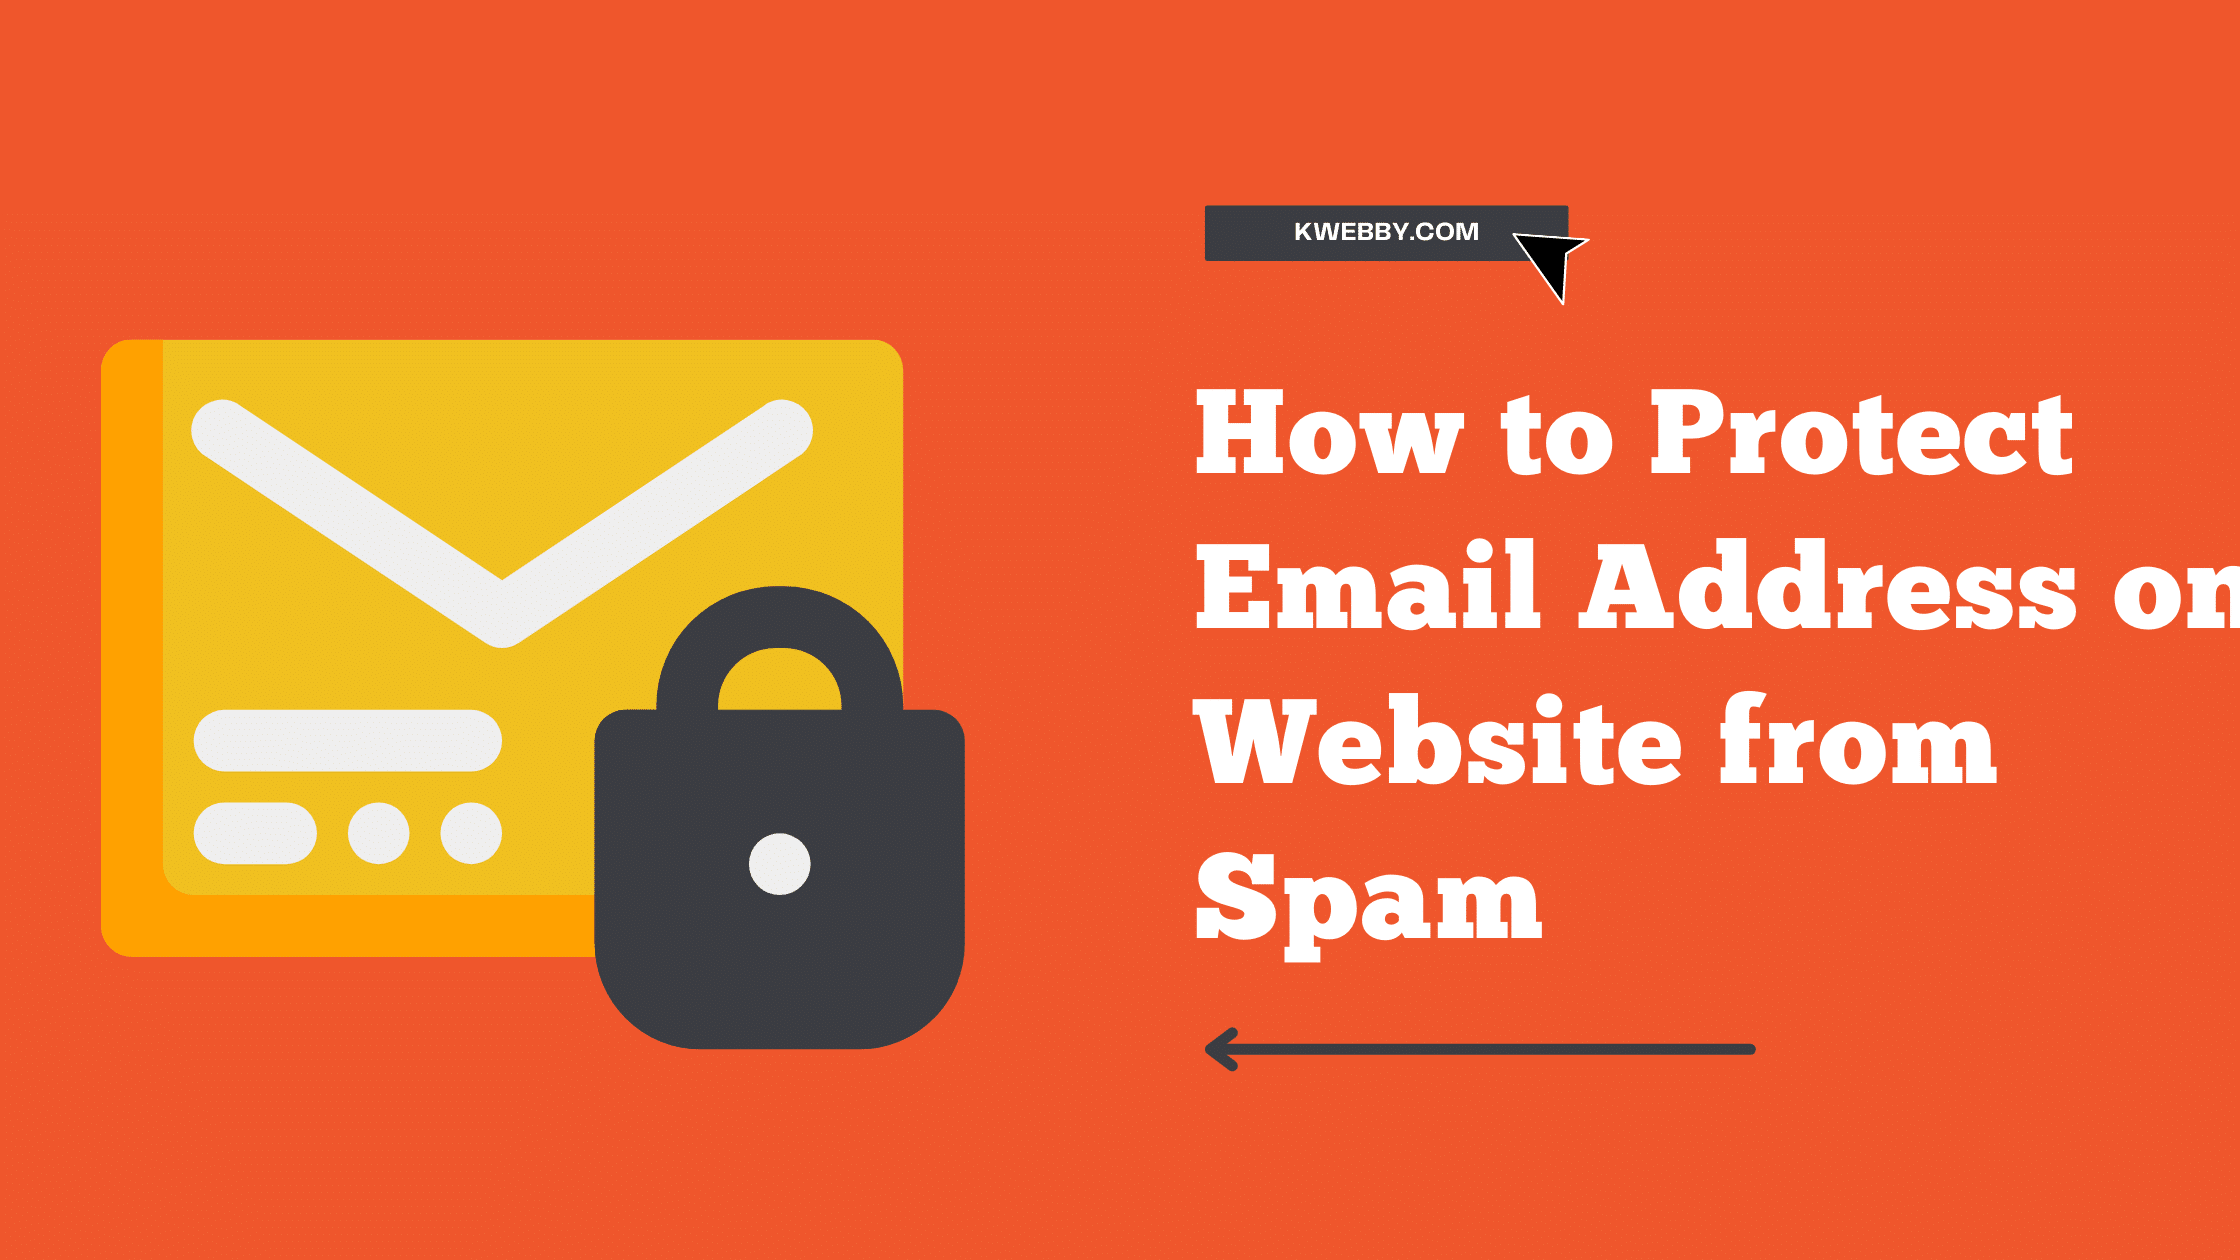 How to Protect Email Address on Website from Spam (2 Methods)